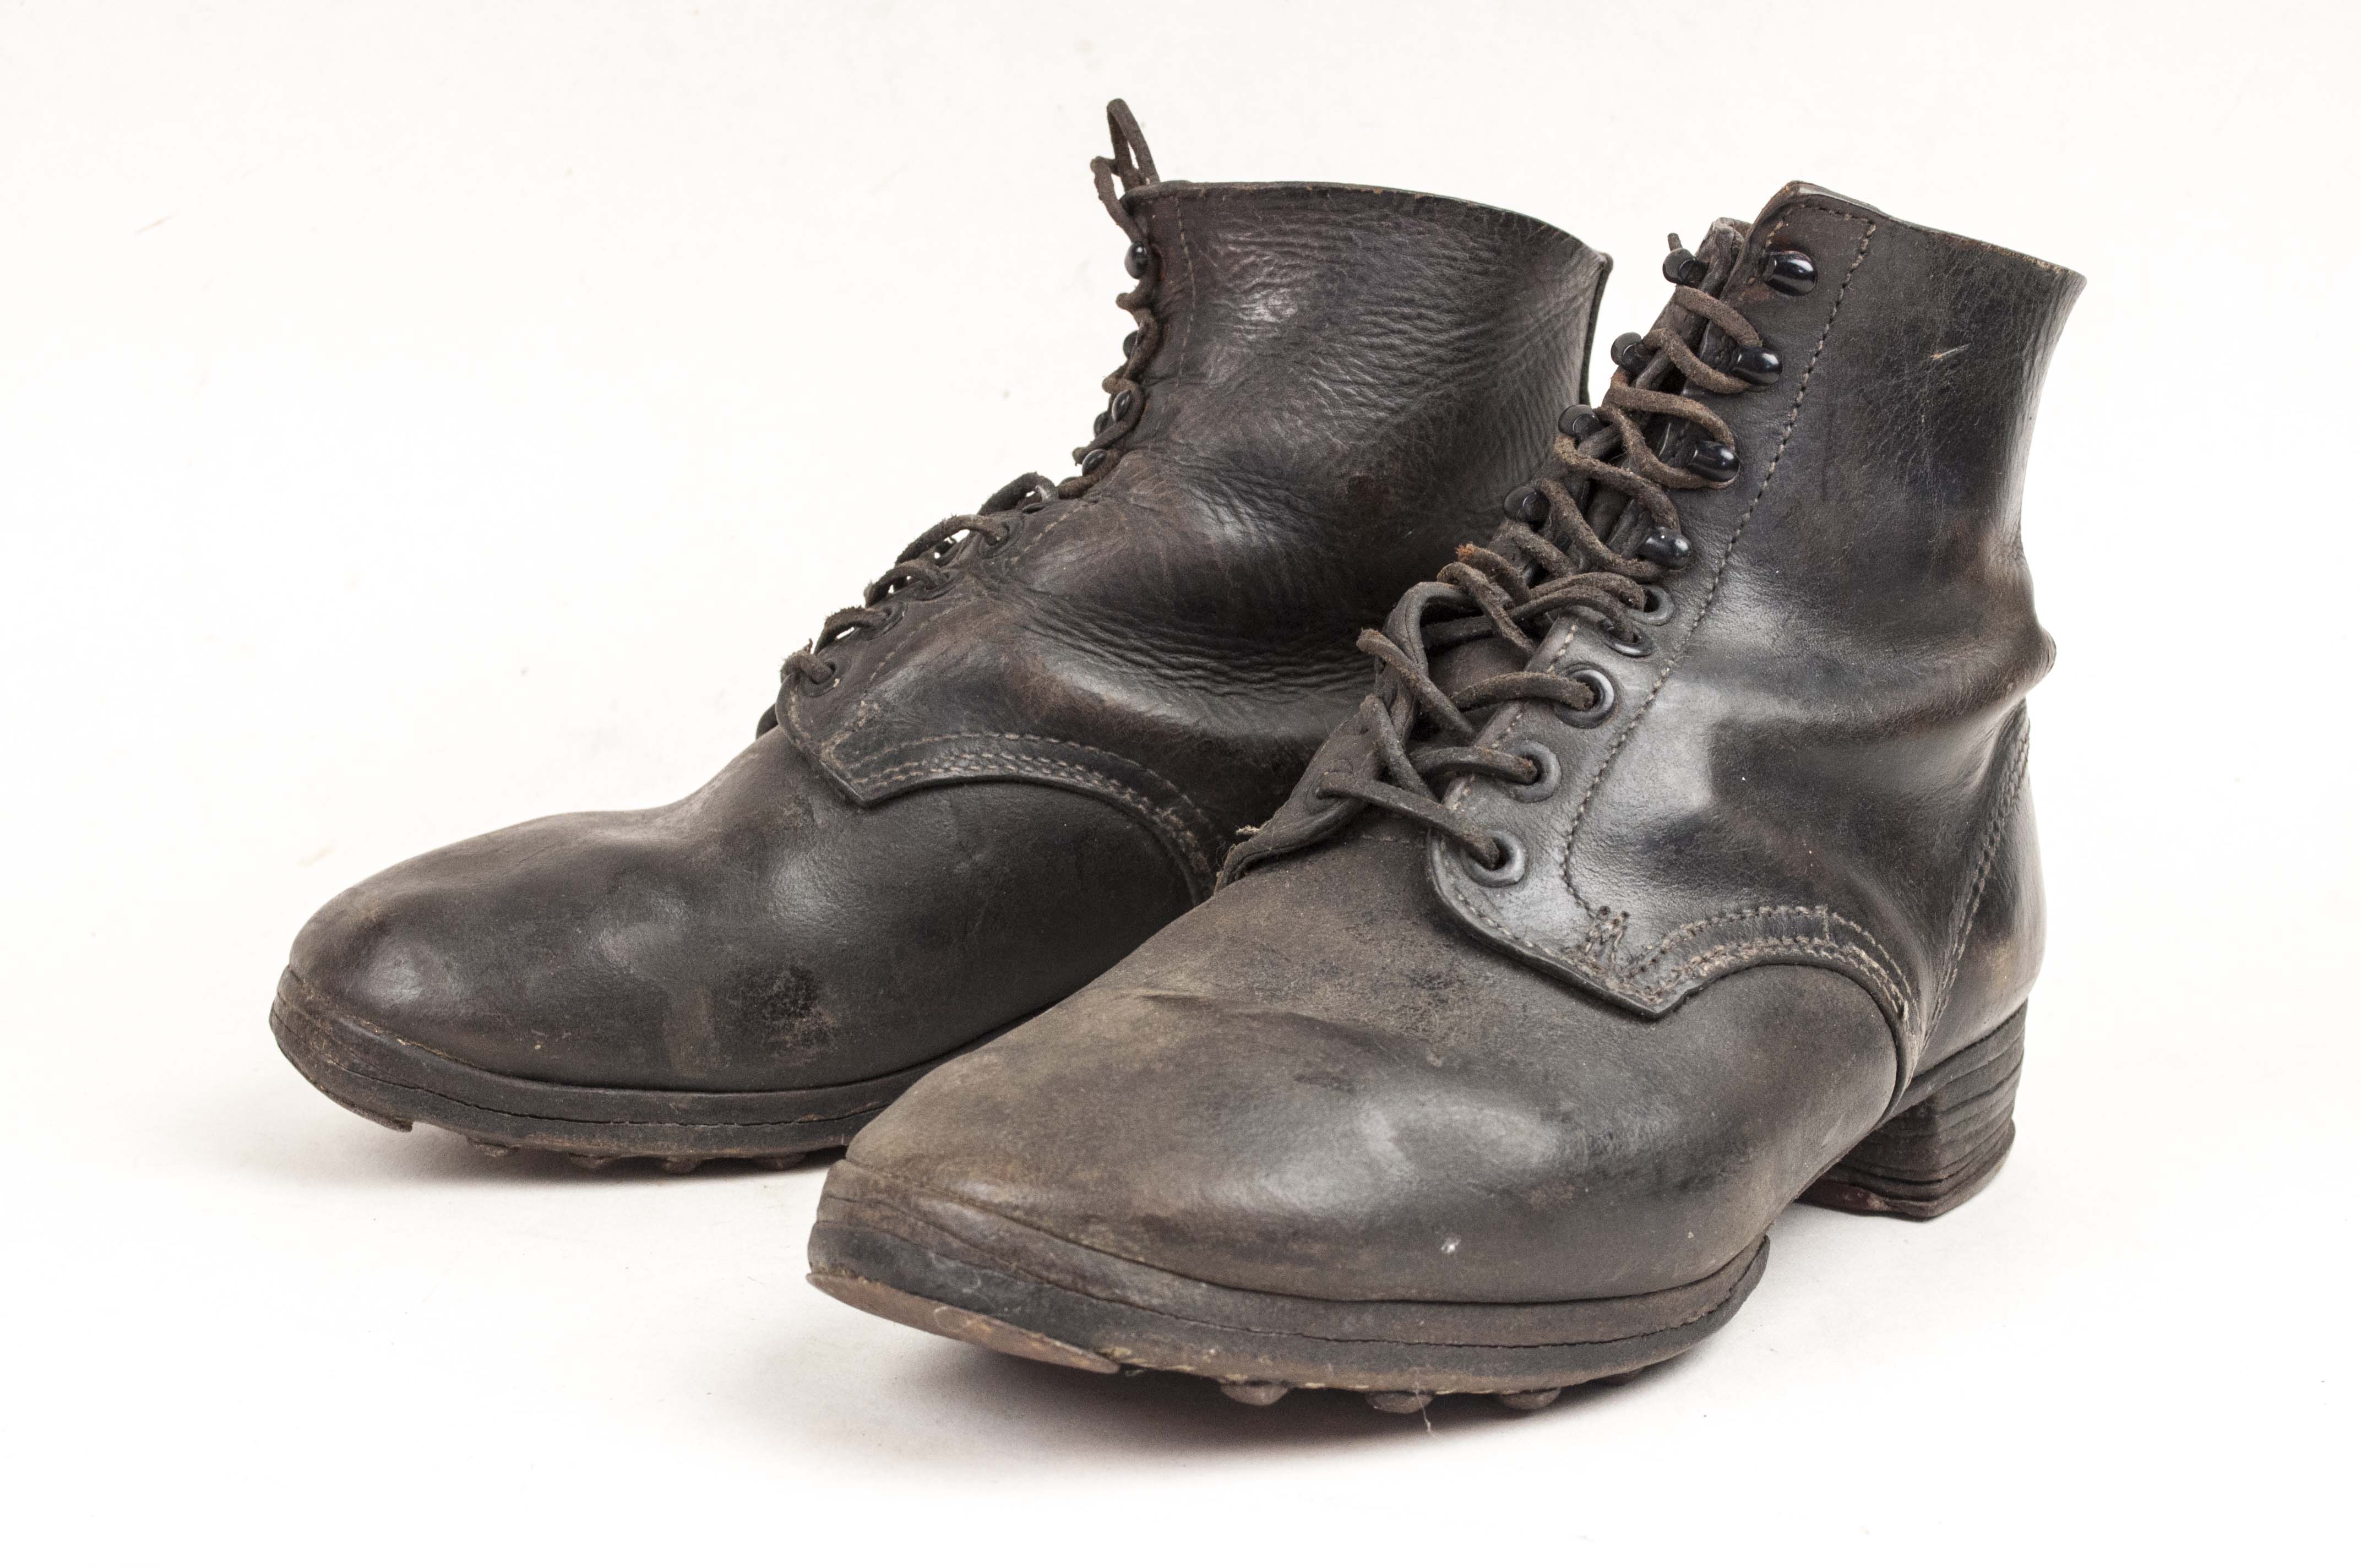 M37 ankle boots in good used condition – fjm44